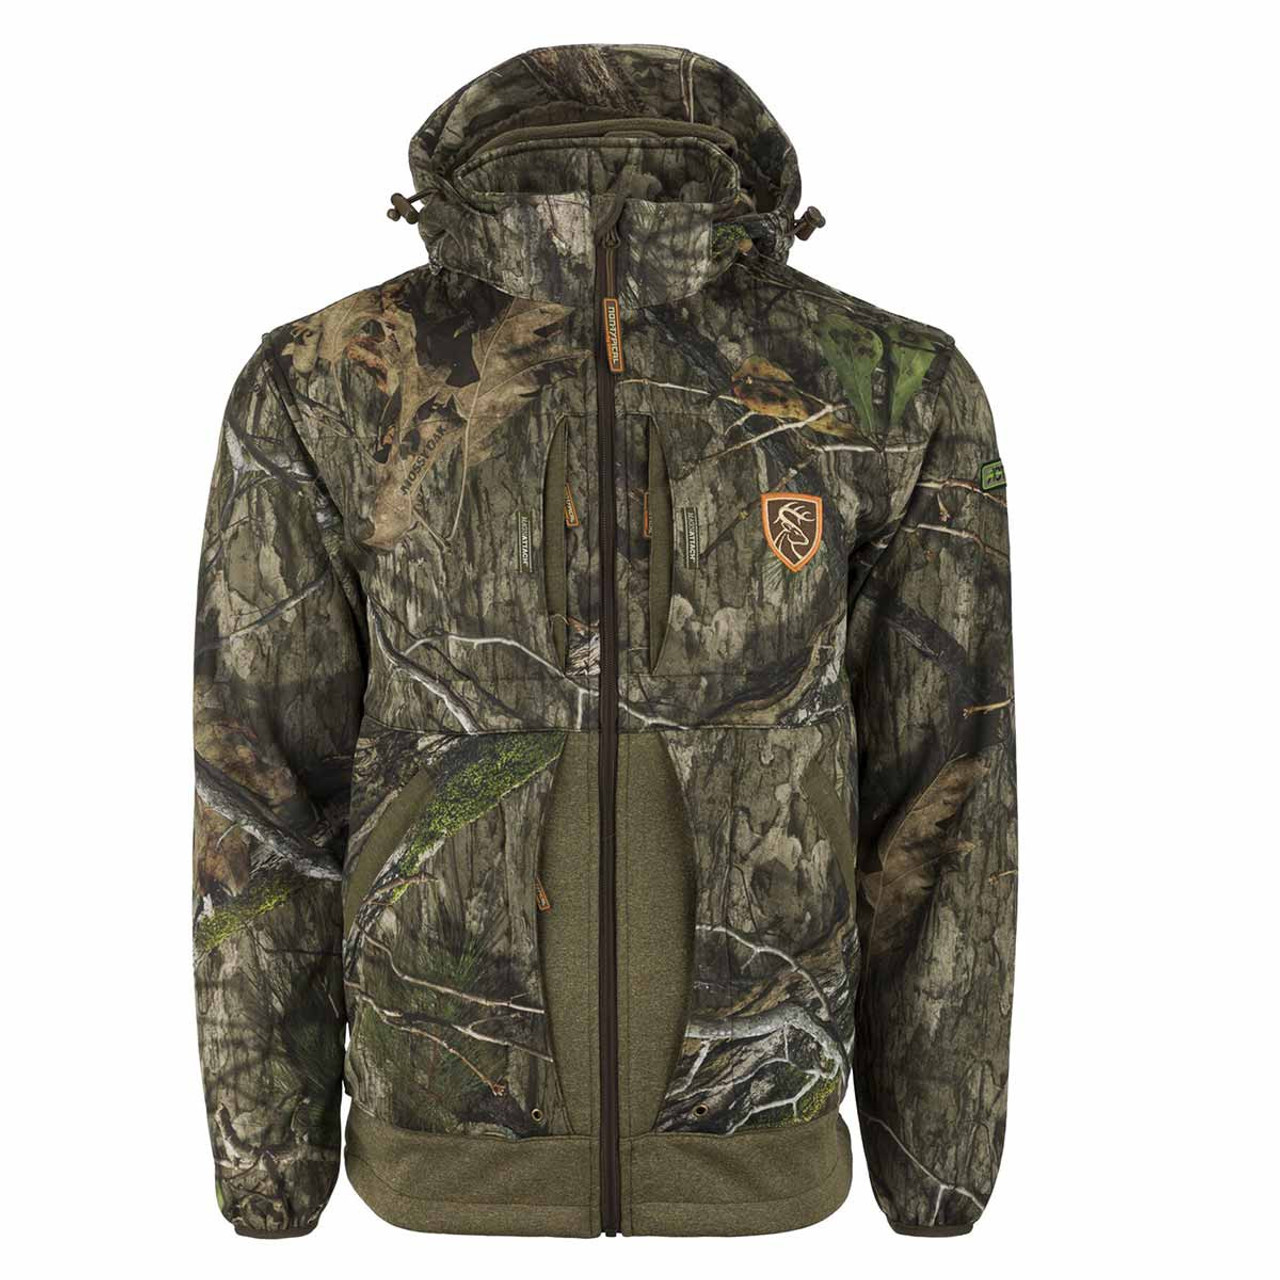 Drake Stand Hunters Endurance Jacket with Agion | Rogers Sporting Goods